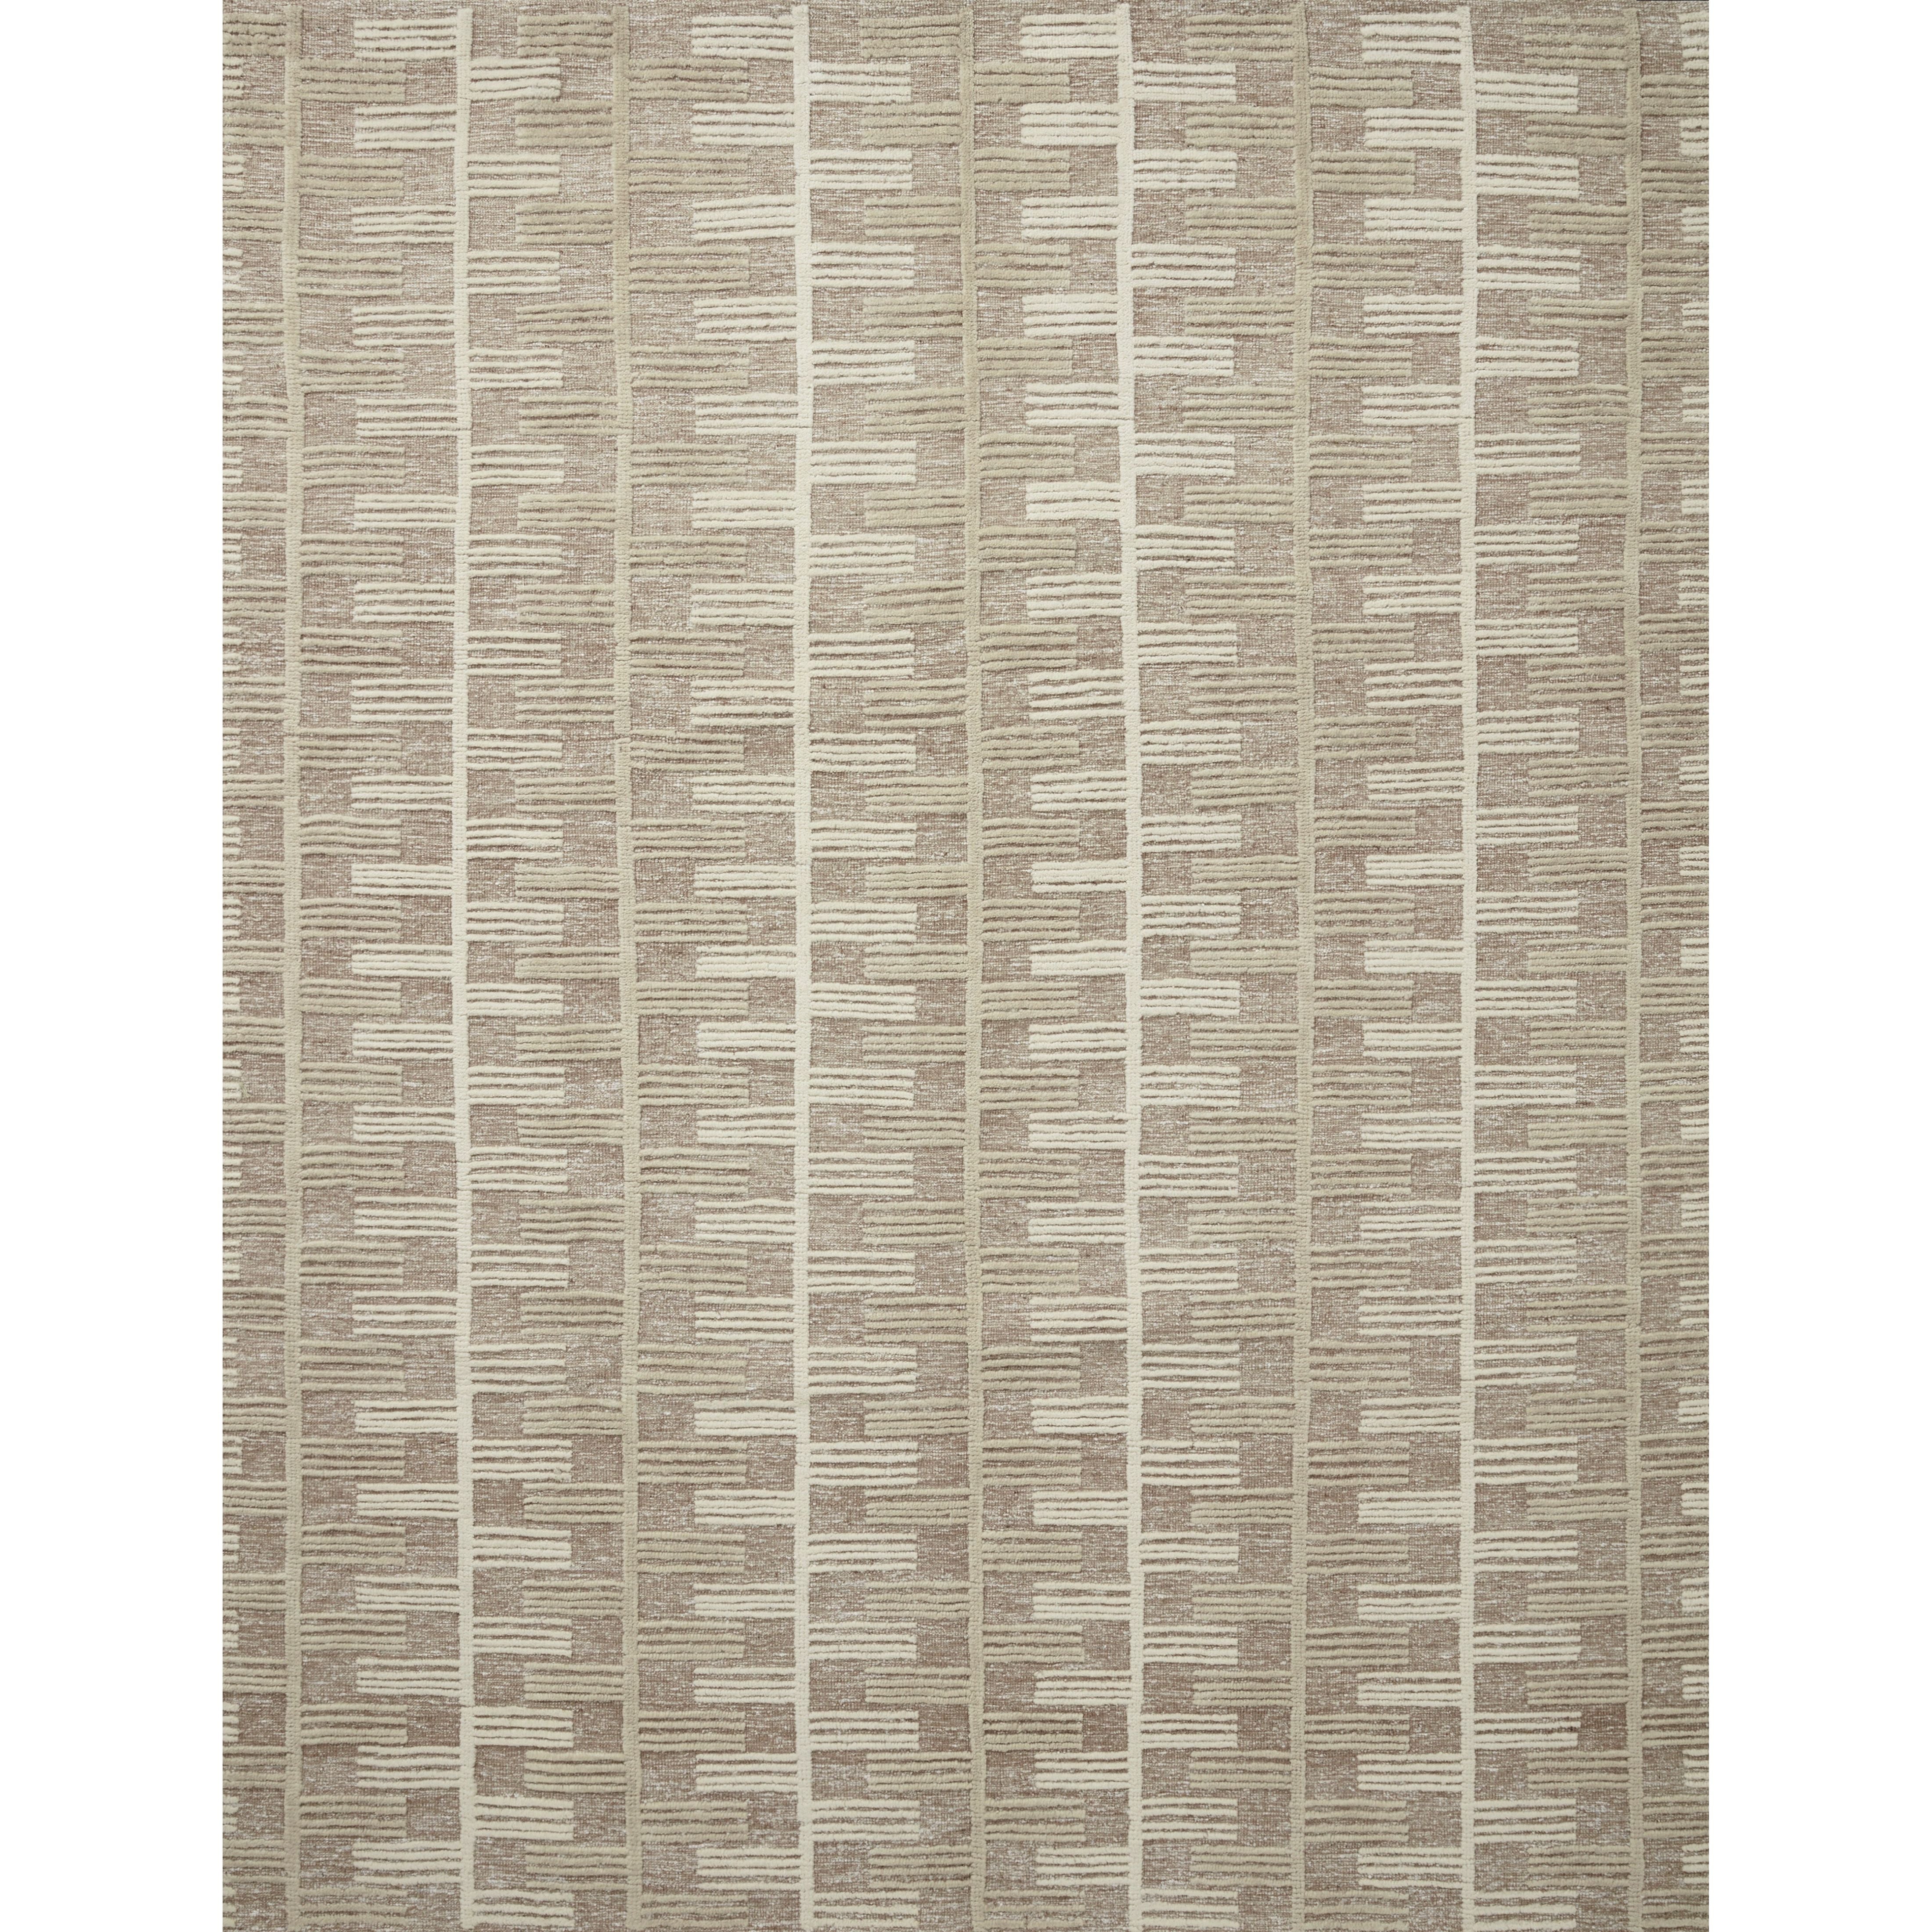 Inspired by Swedish weavings, the Harrison Taupe / Ivory HAR-02 CC rug for Carrier and Company x Loloi is a playful selection of high/low pile, where the patterns are expressed through the weaves. Amethyst Home provides interior design services, furniture, rugs, and lighting in the Kansas City metro area.